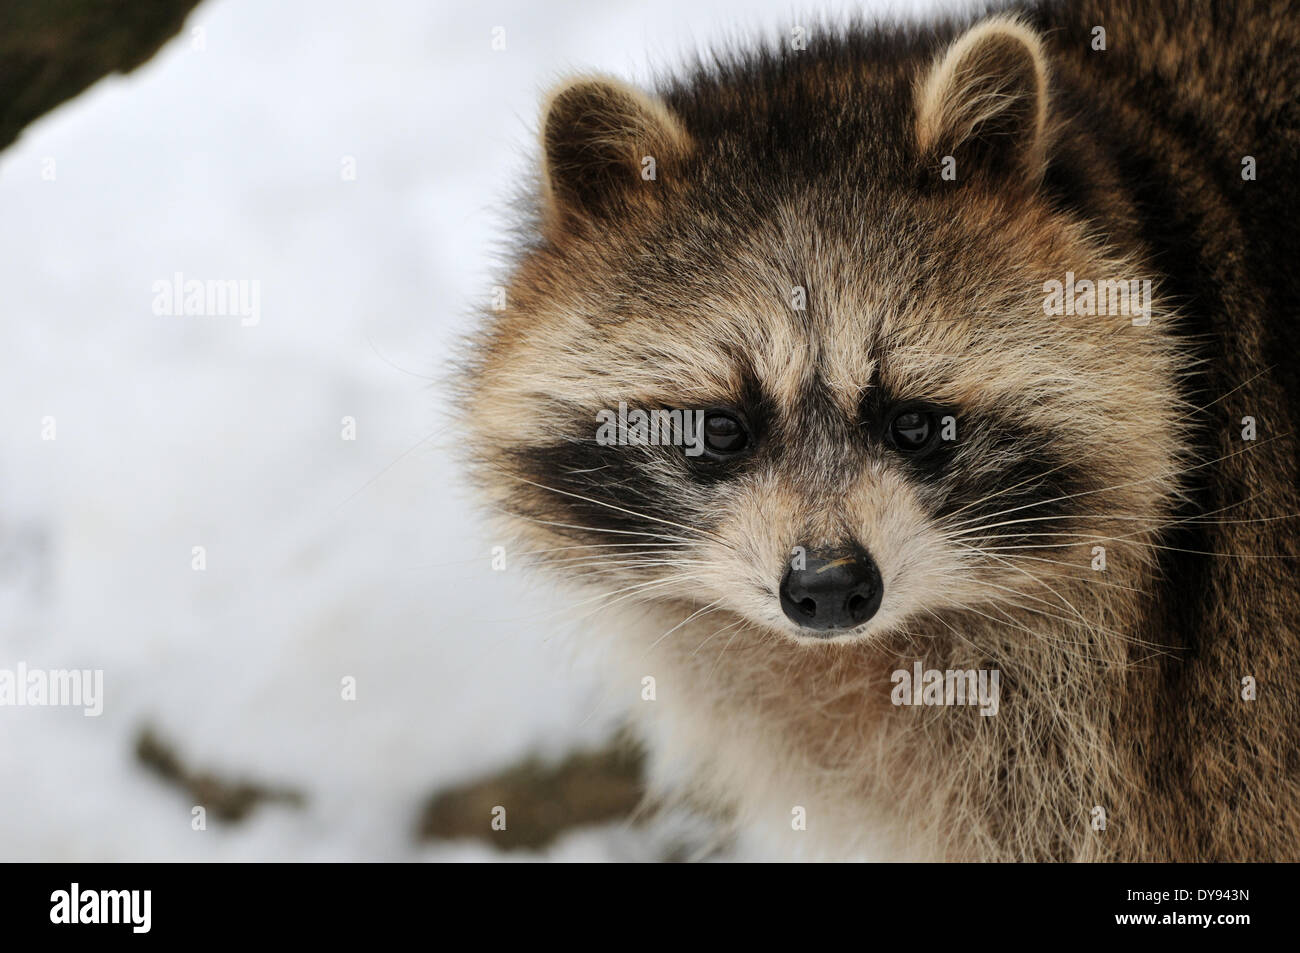 Racoon, canids, predator, small bear, North American racoon, Procyon lotor, racoons, animal, animals, Germany, Europe, Stock Photo